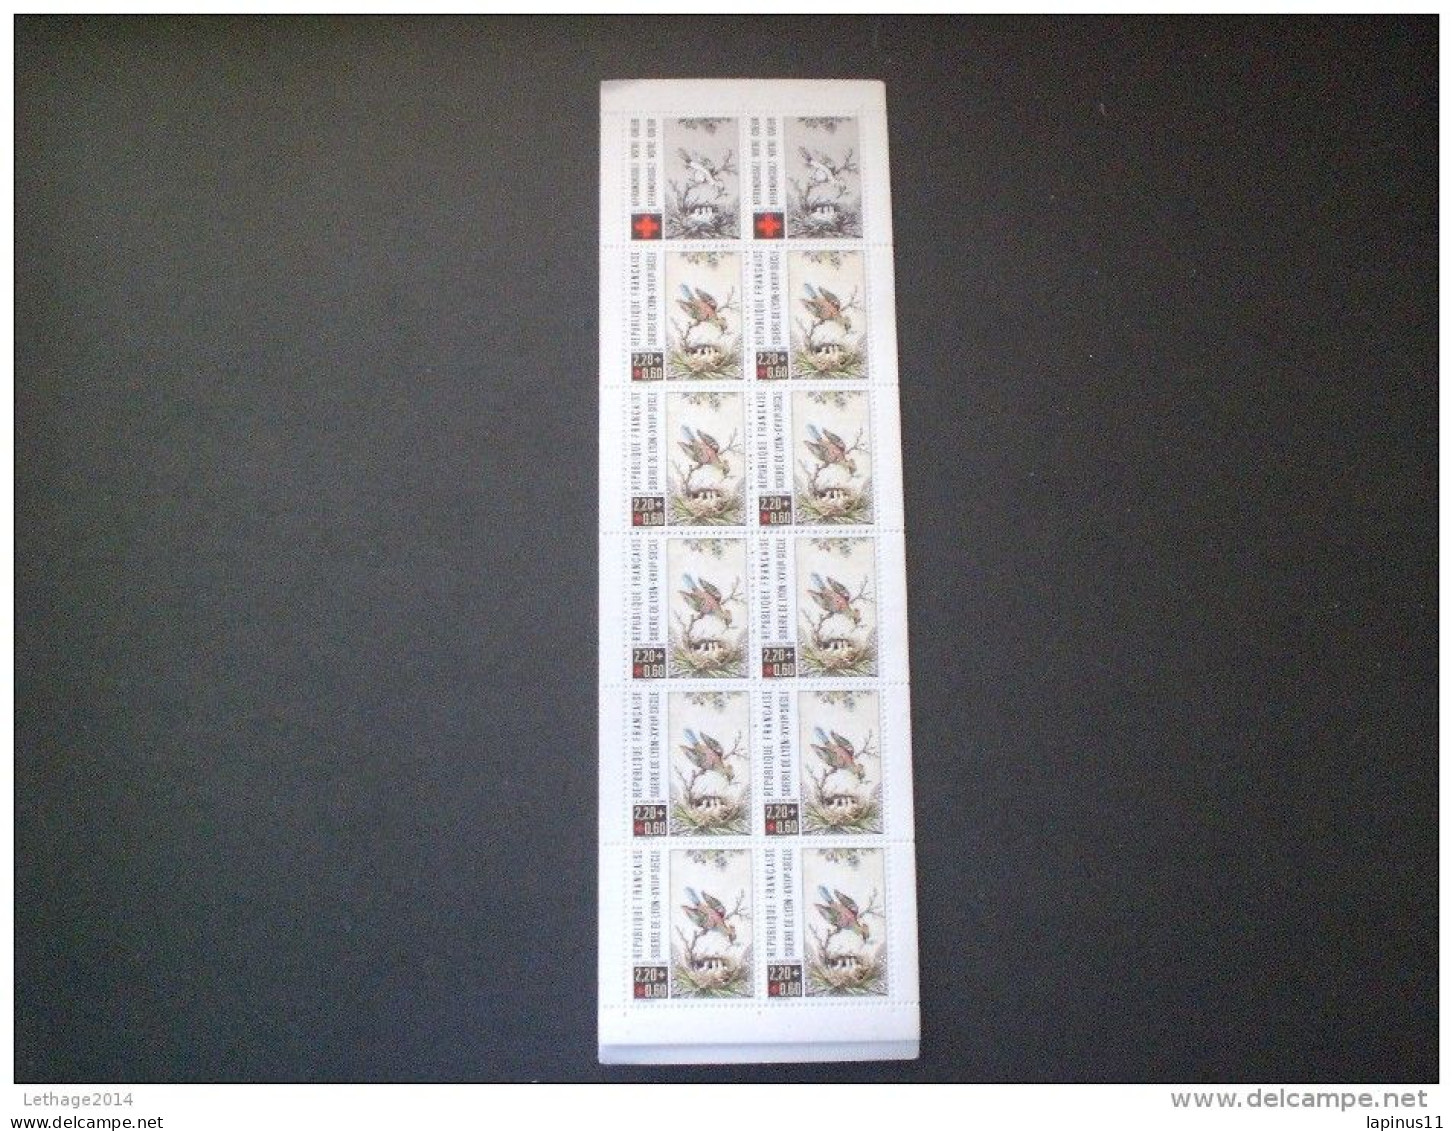 STAMPS FRANCE CARNETS 1985 RED CROSS - Personnages